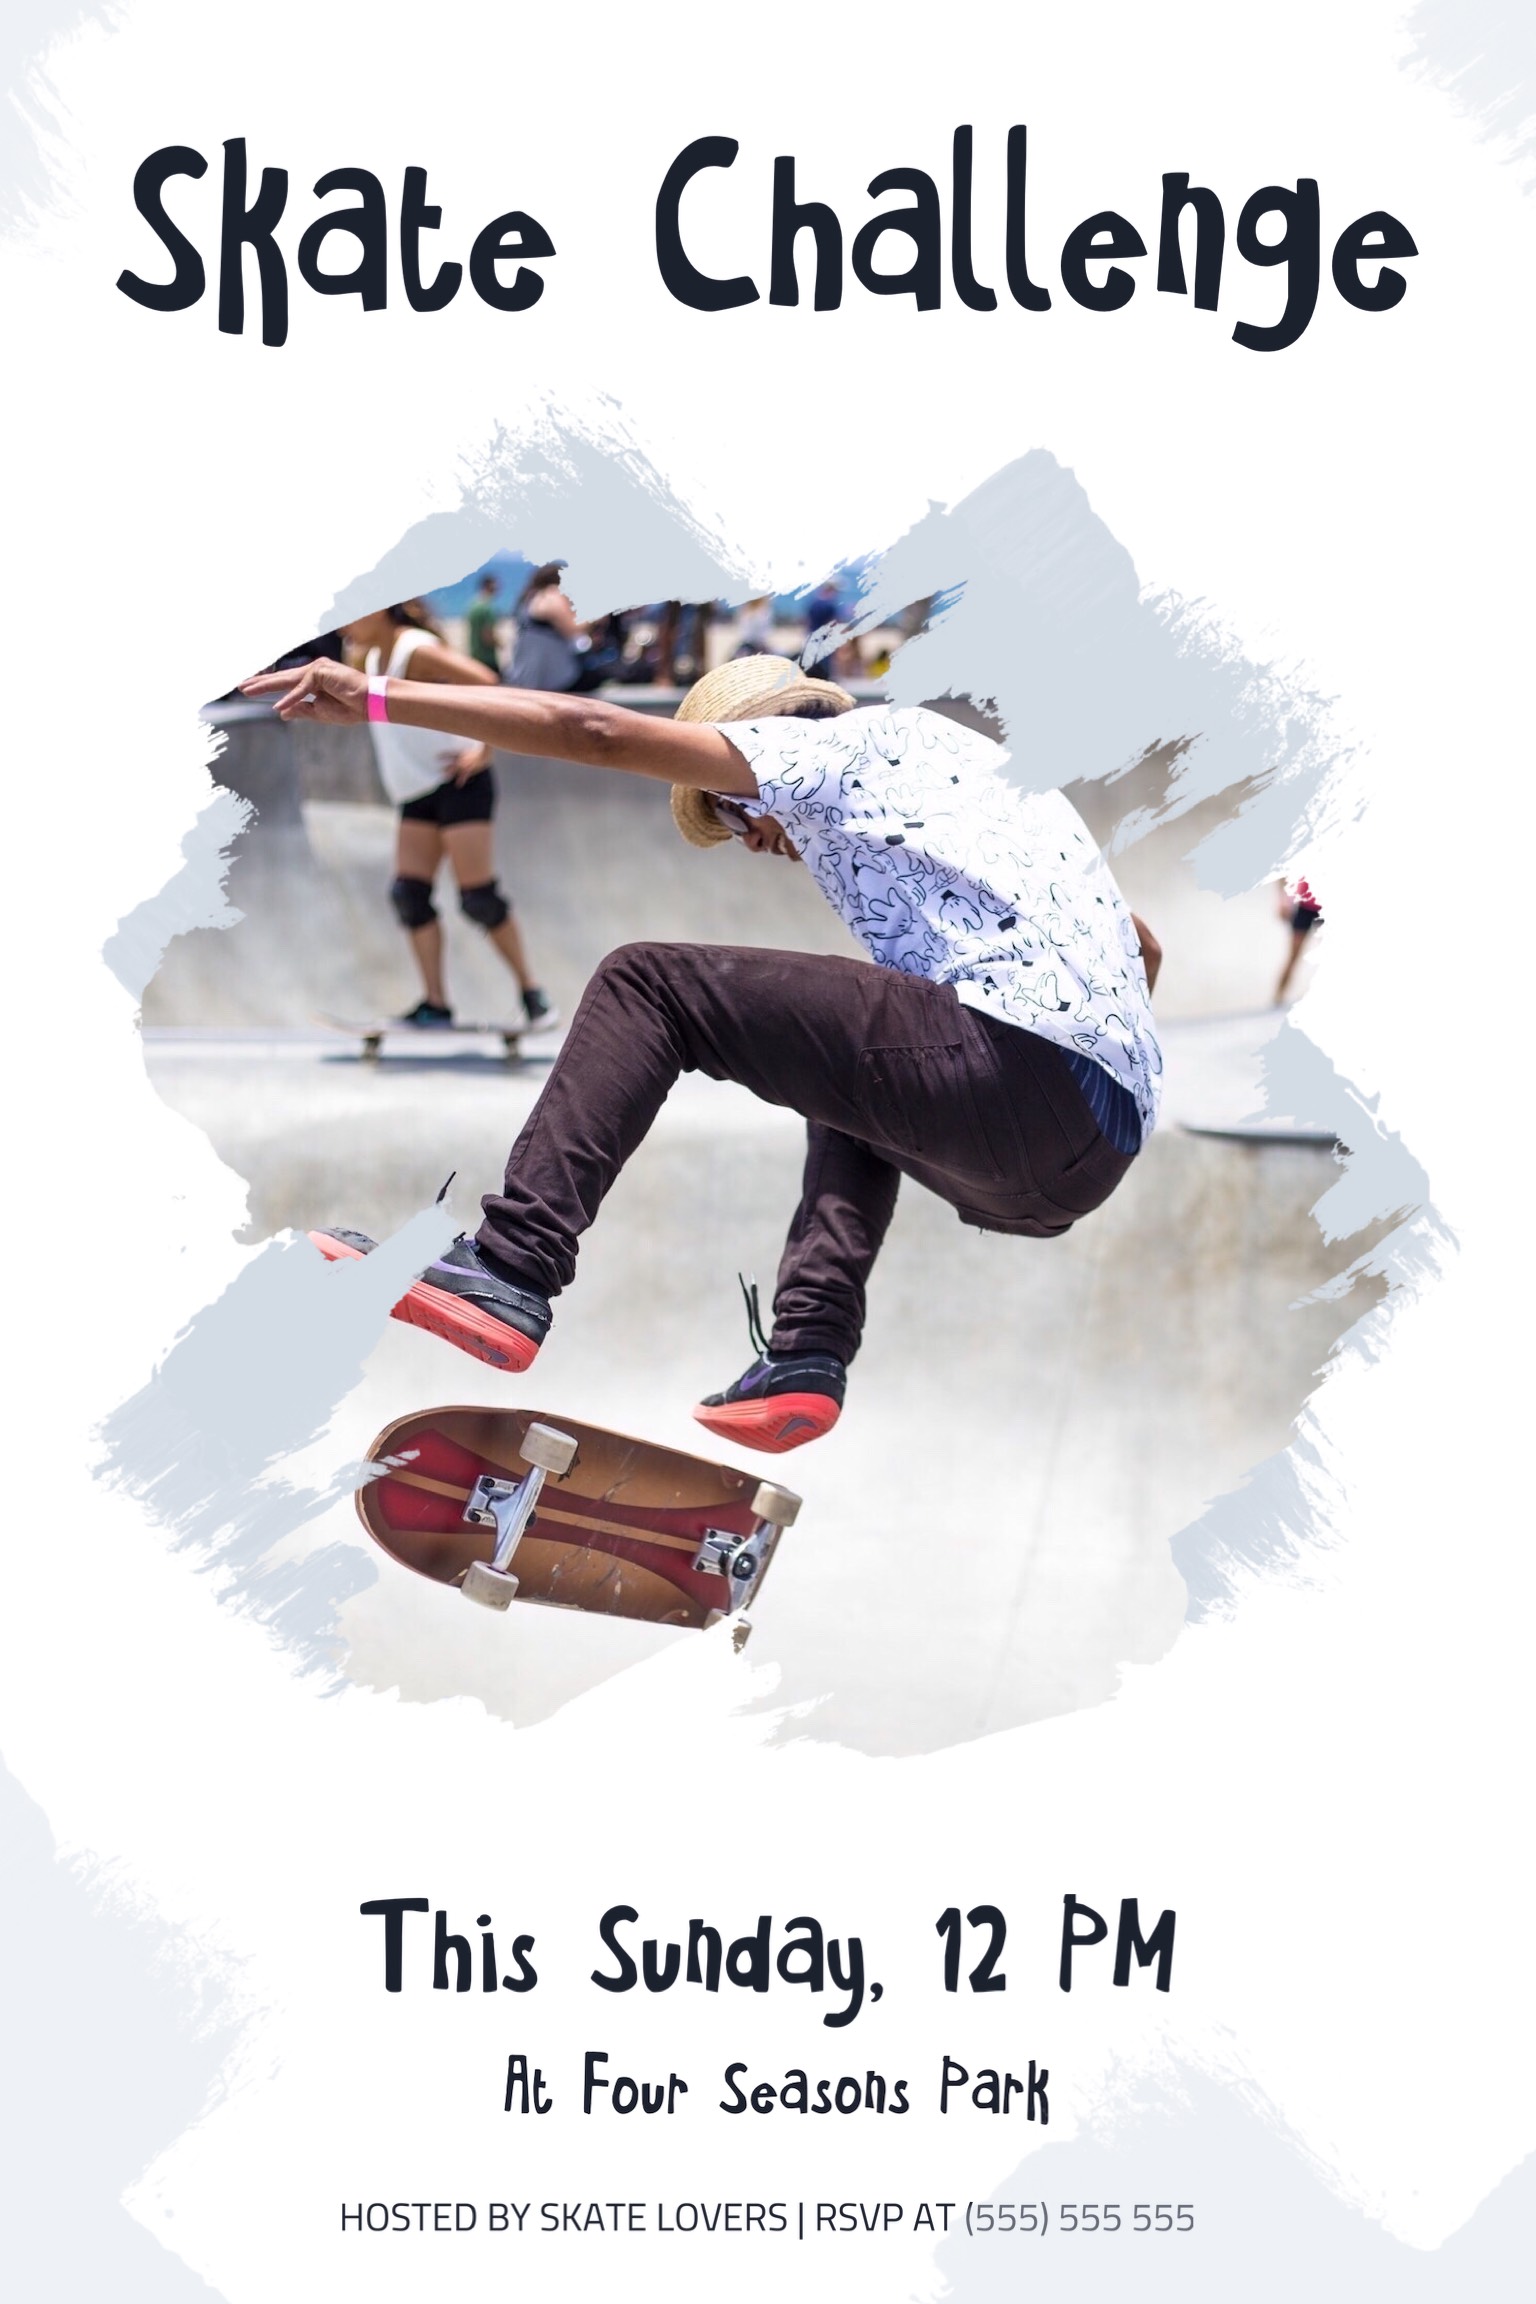 A Skateboarder Is Doing A Trick In The Air Invitation Template